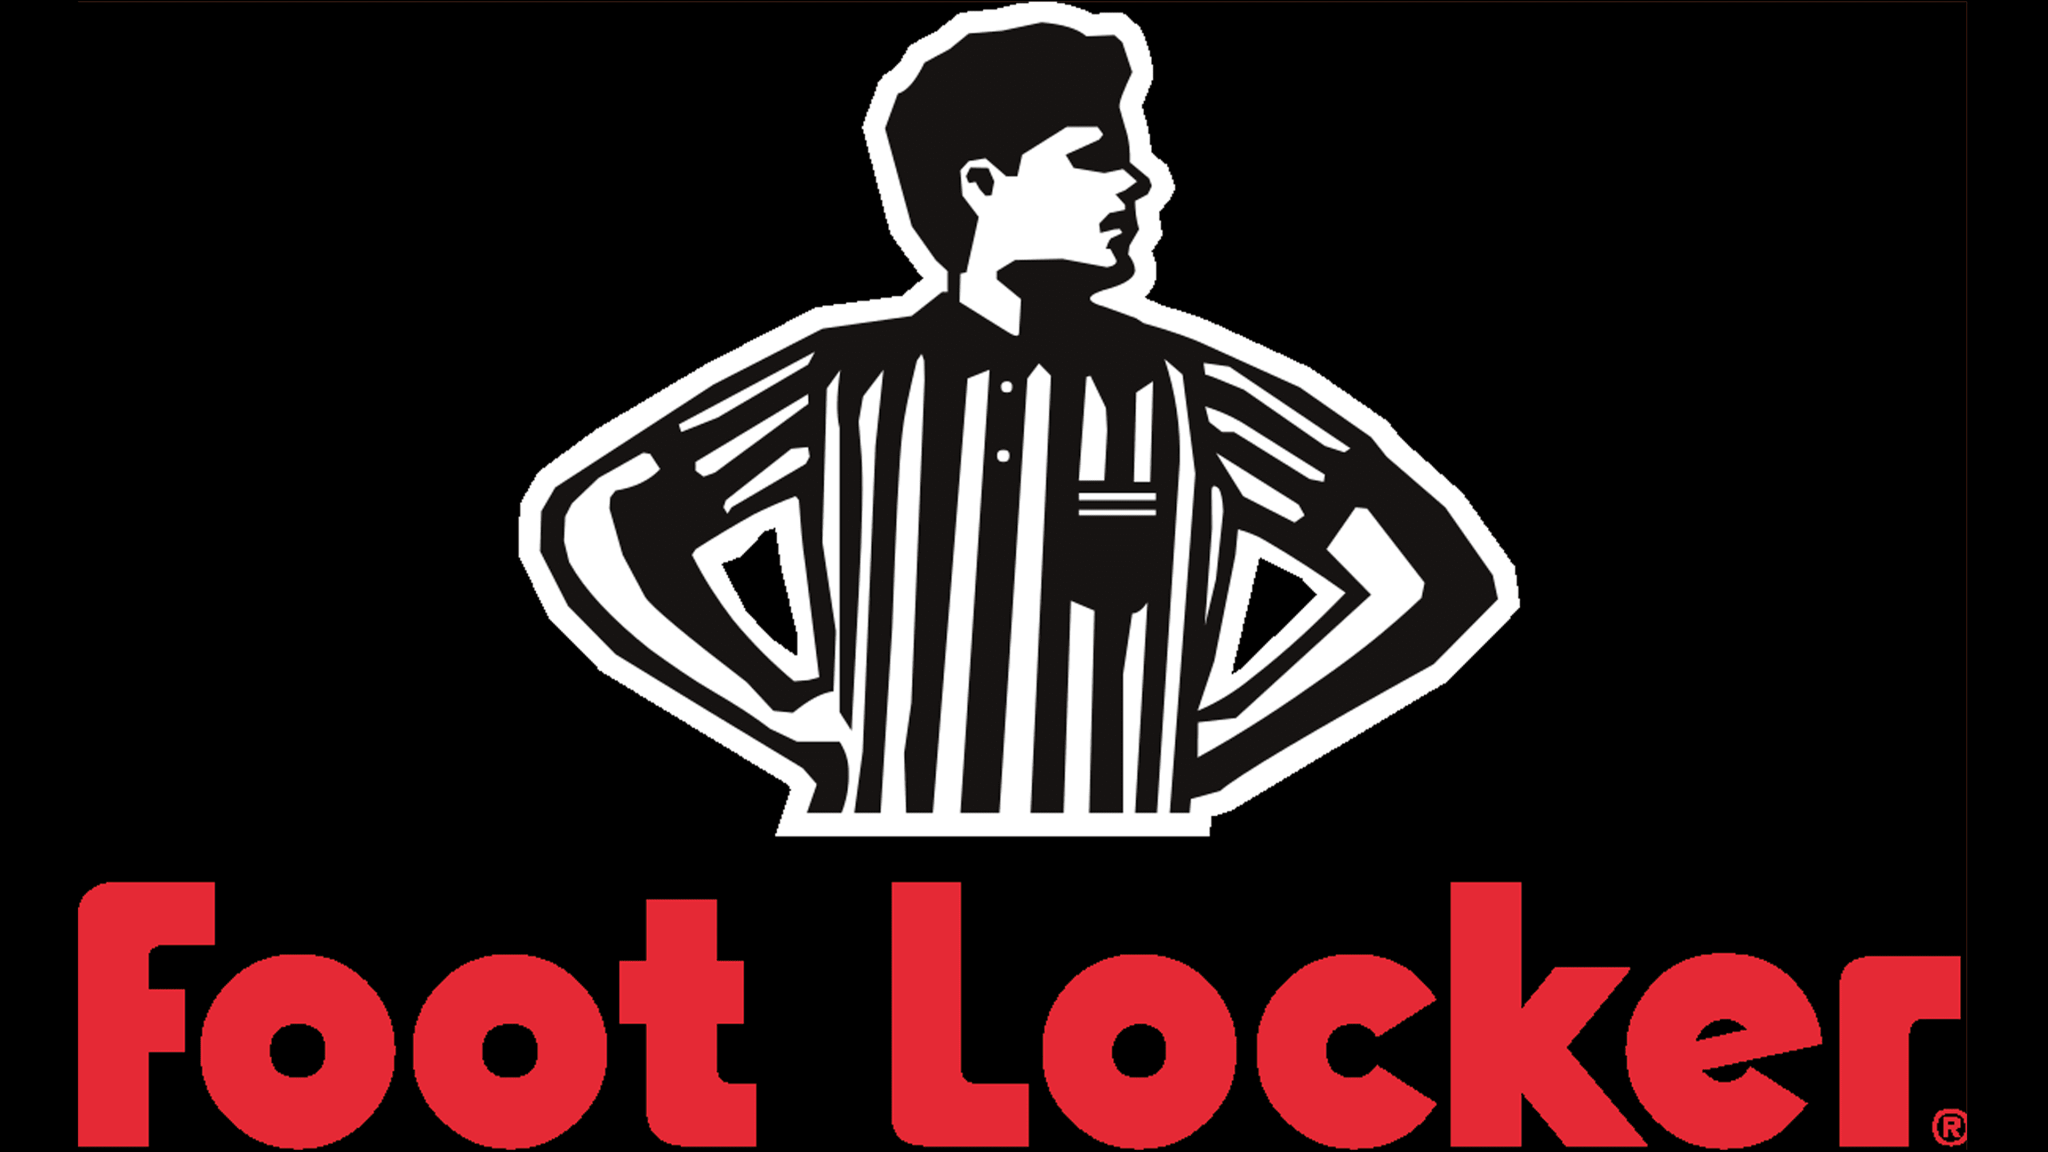 foot-locker-logo-and-symbol-meaning-history-png